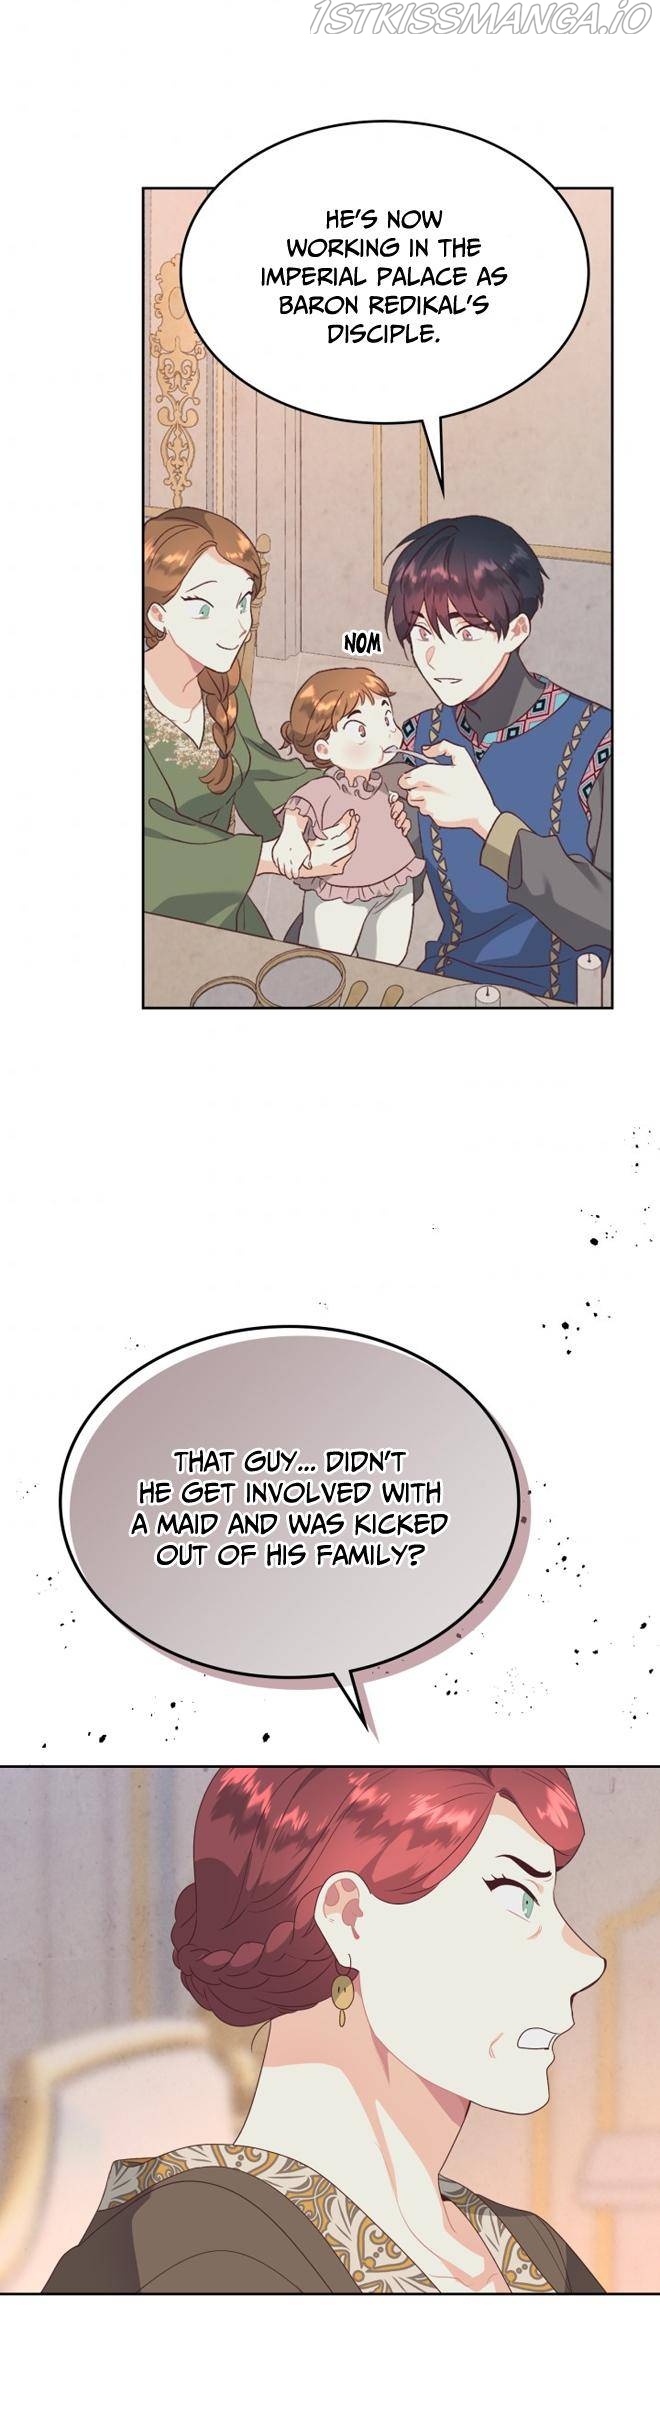 Emperor And The Female Knight ( The King and His Knight ) Chapter 130 - Page 26